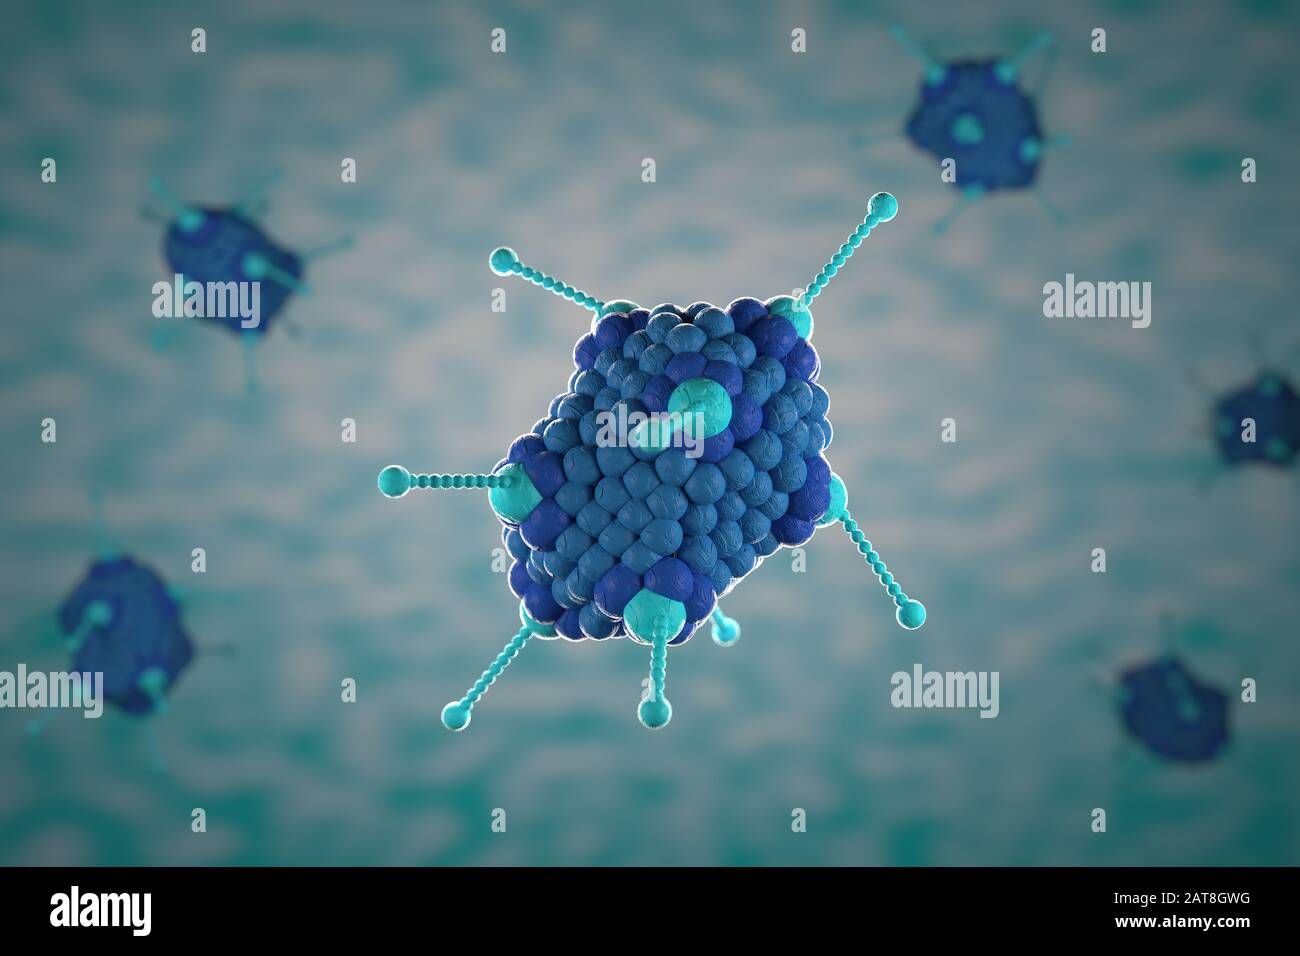 3d illustration, close up of microscope Adoeno Virus on a blue background Stock Photo